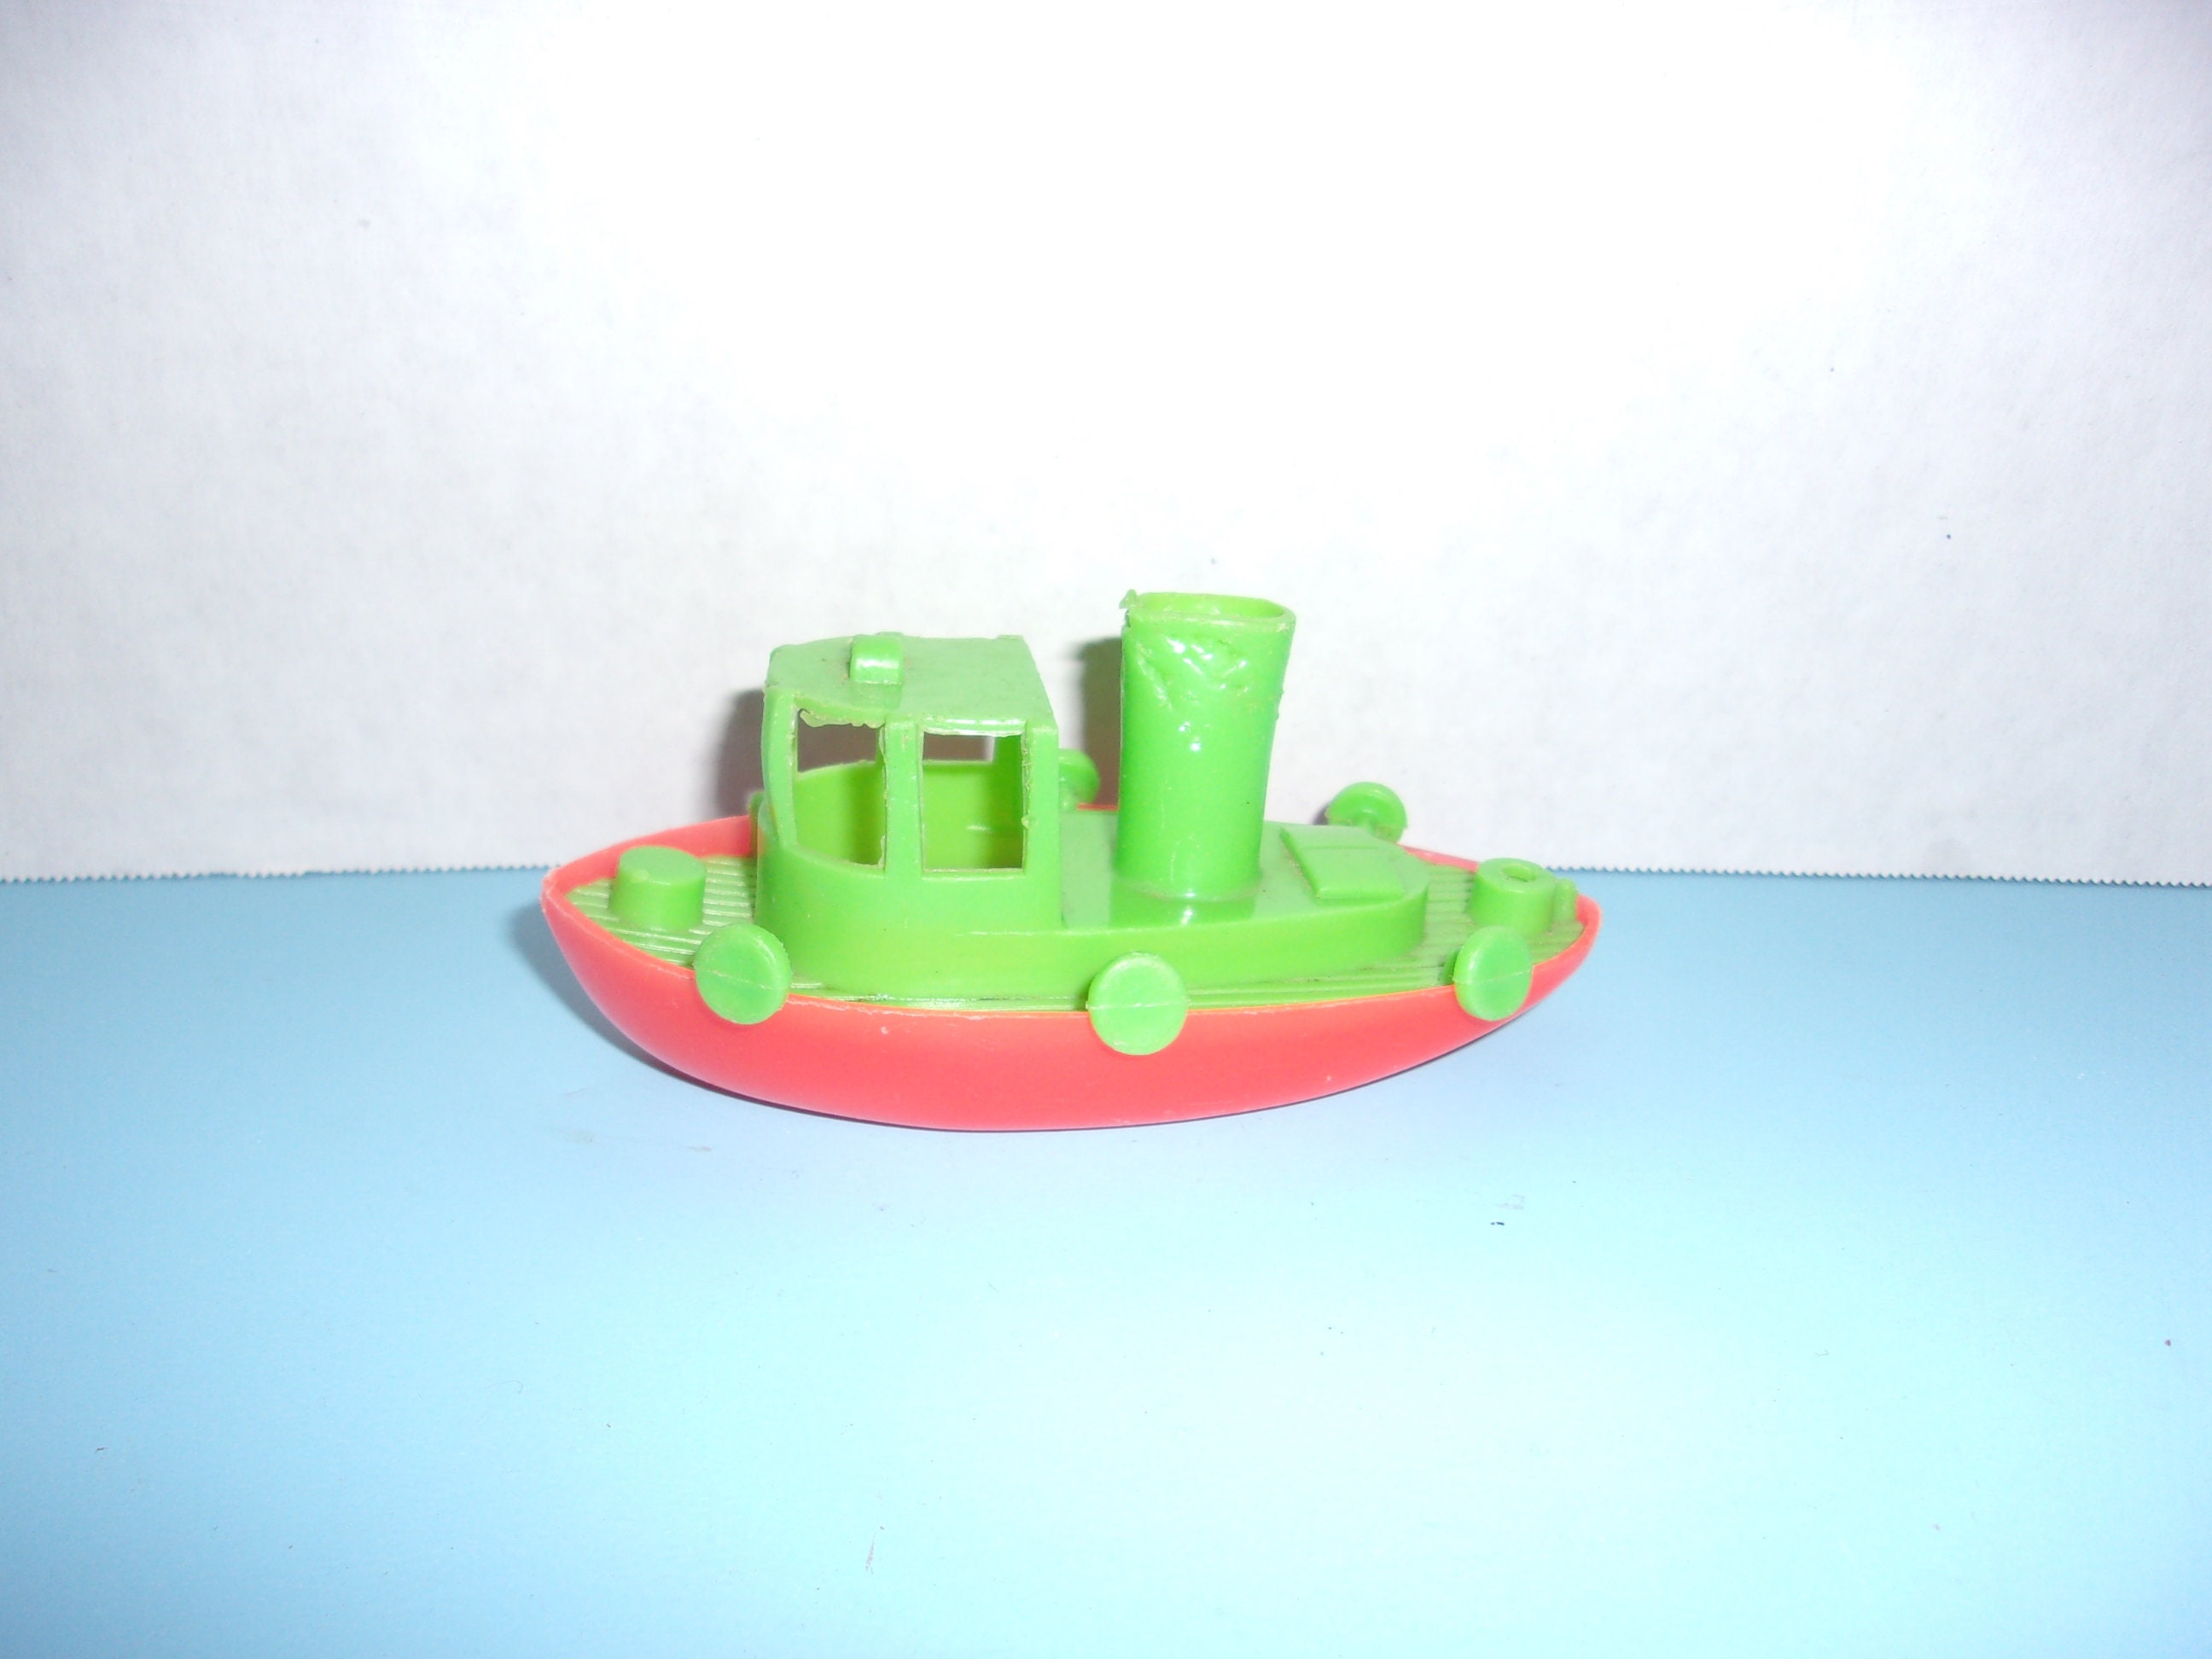 Vintage 1950's-60's Plastic Tugboat Toy, Made in USA, Green and Orange,  Retro Toy -  Canada